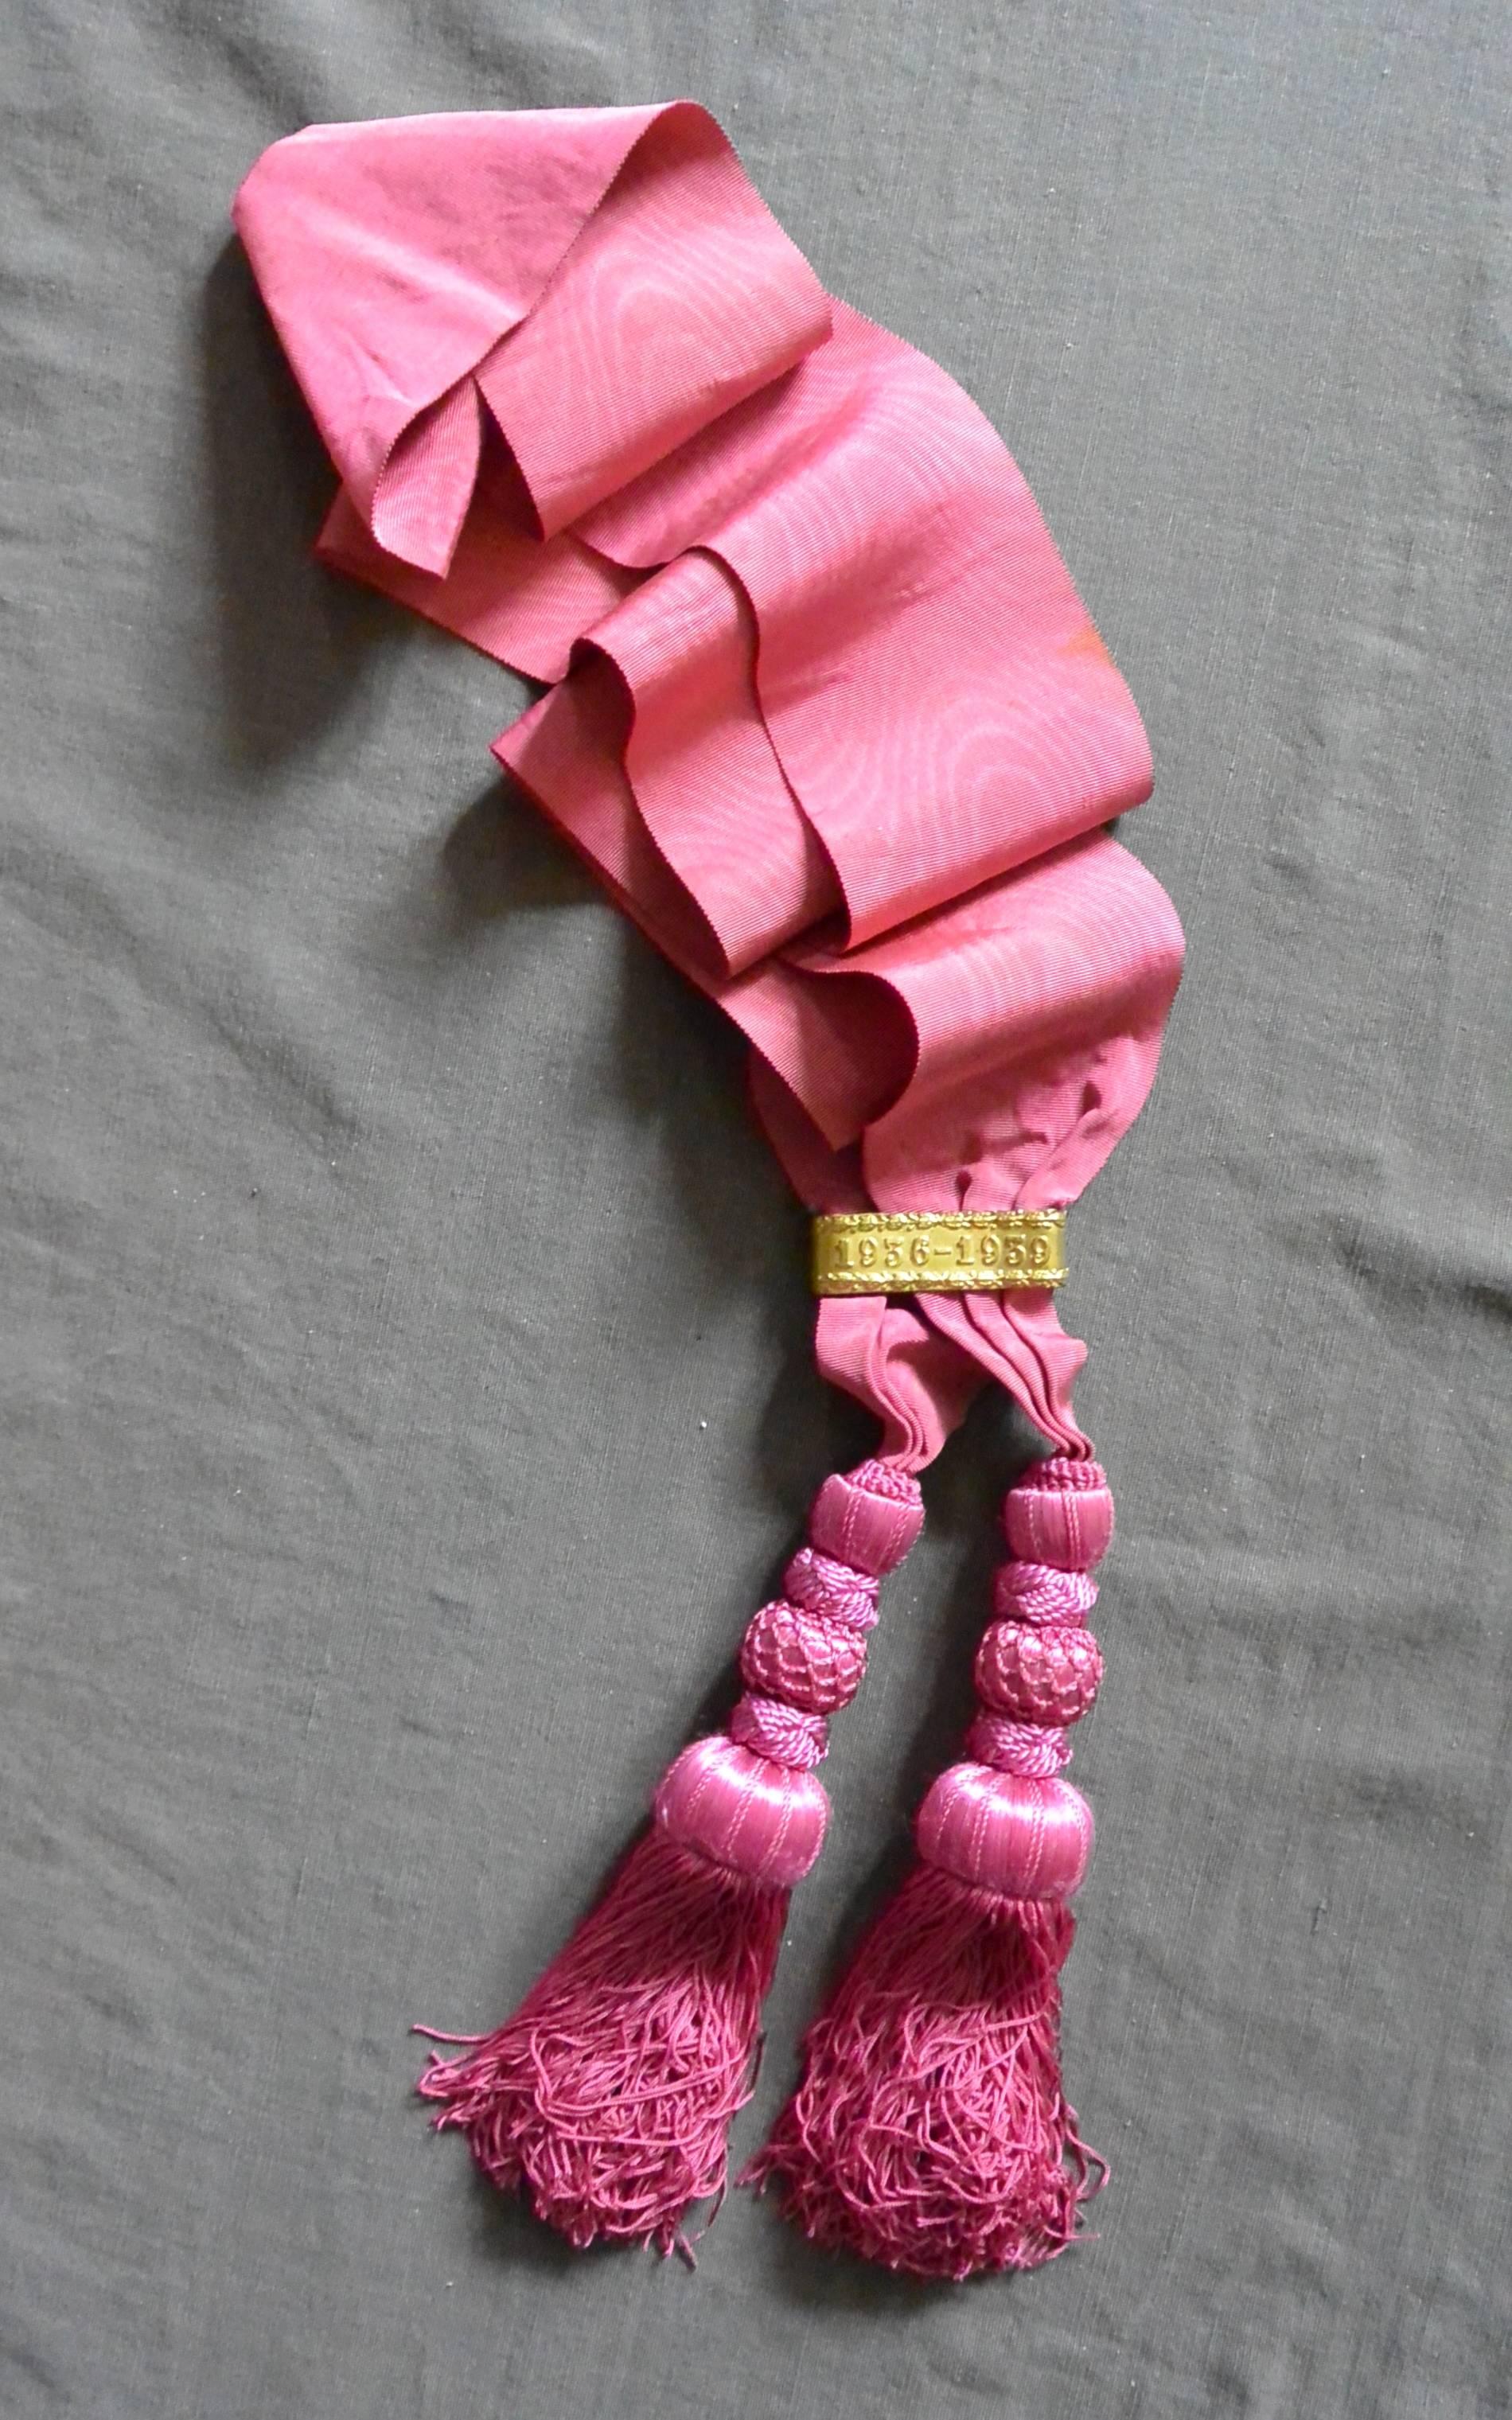 Spanish pink grosgrain sash with tassels and gilt metal embossed clasp 